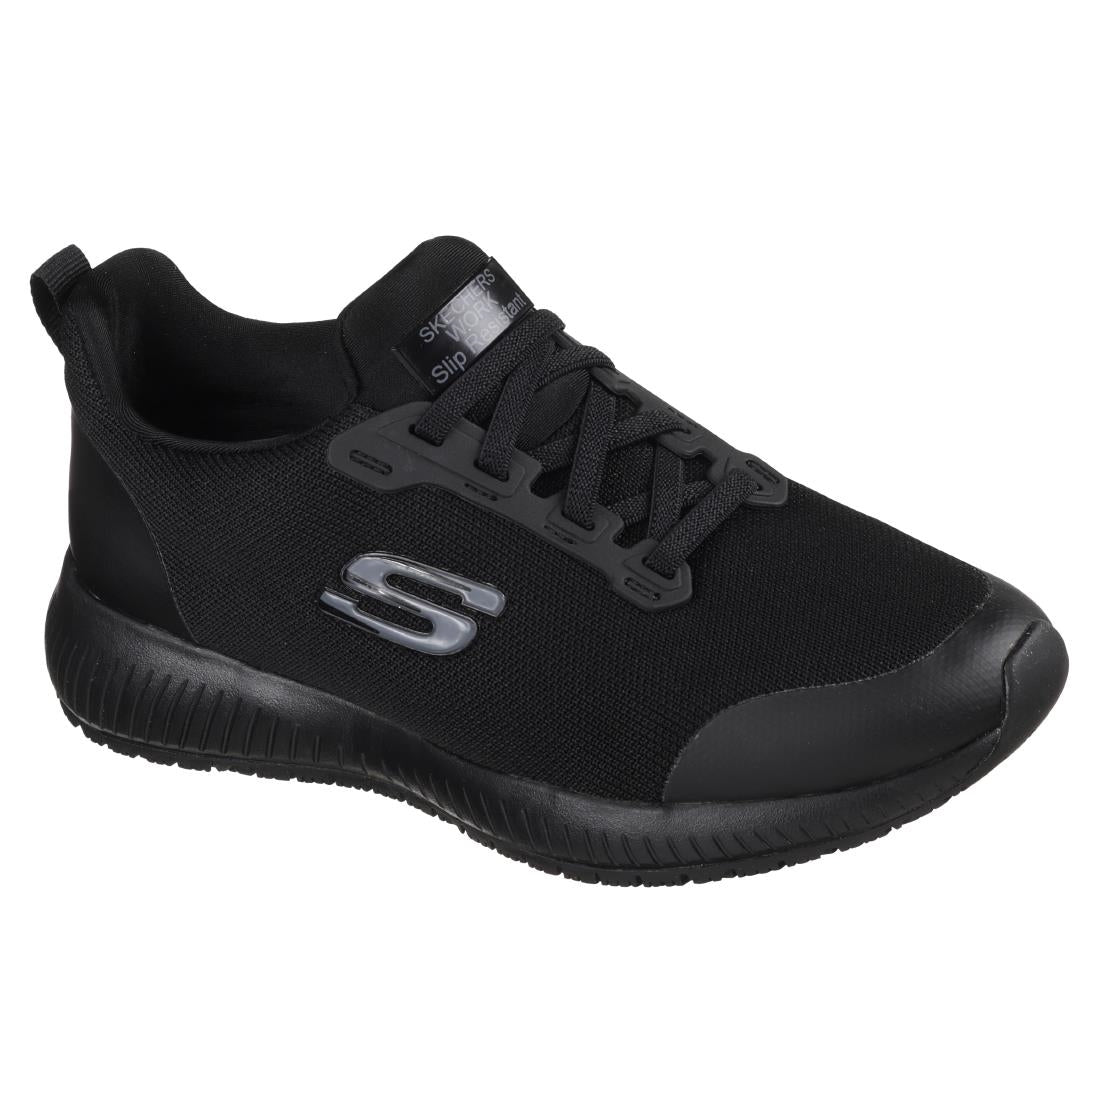 BB672-36 Skechers Womens Slip Resistant Squad Trainer Size 36 JD Catering Equipment Solutions Ltd